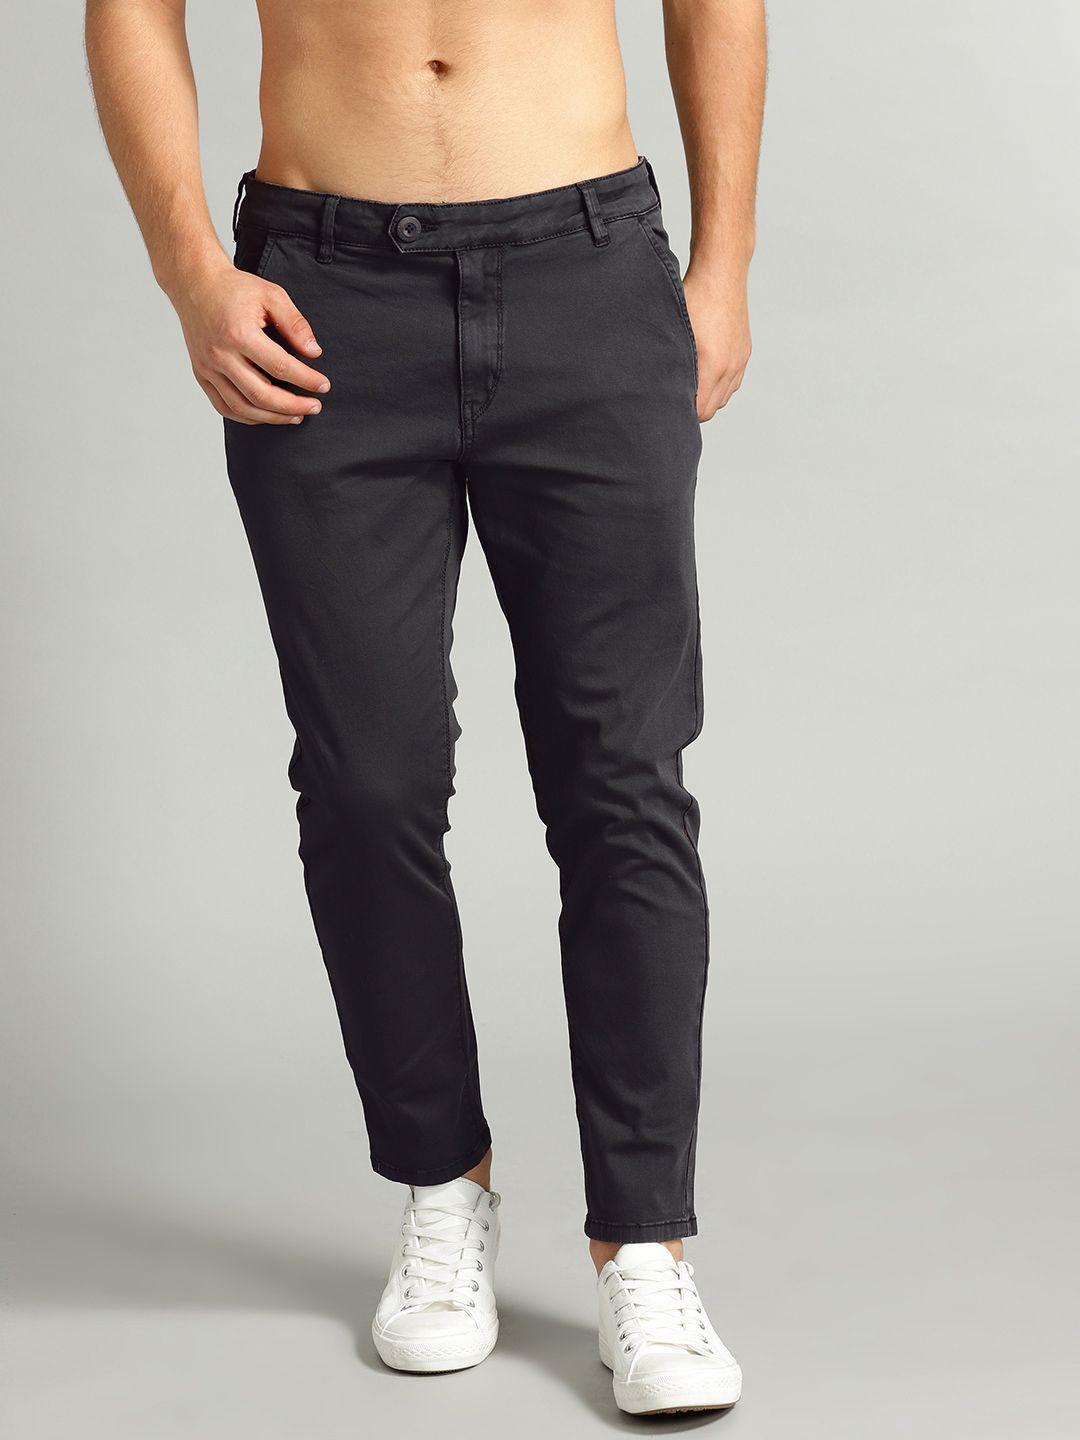 the roadster lifestyle co men black regular fit solid trousers